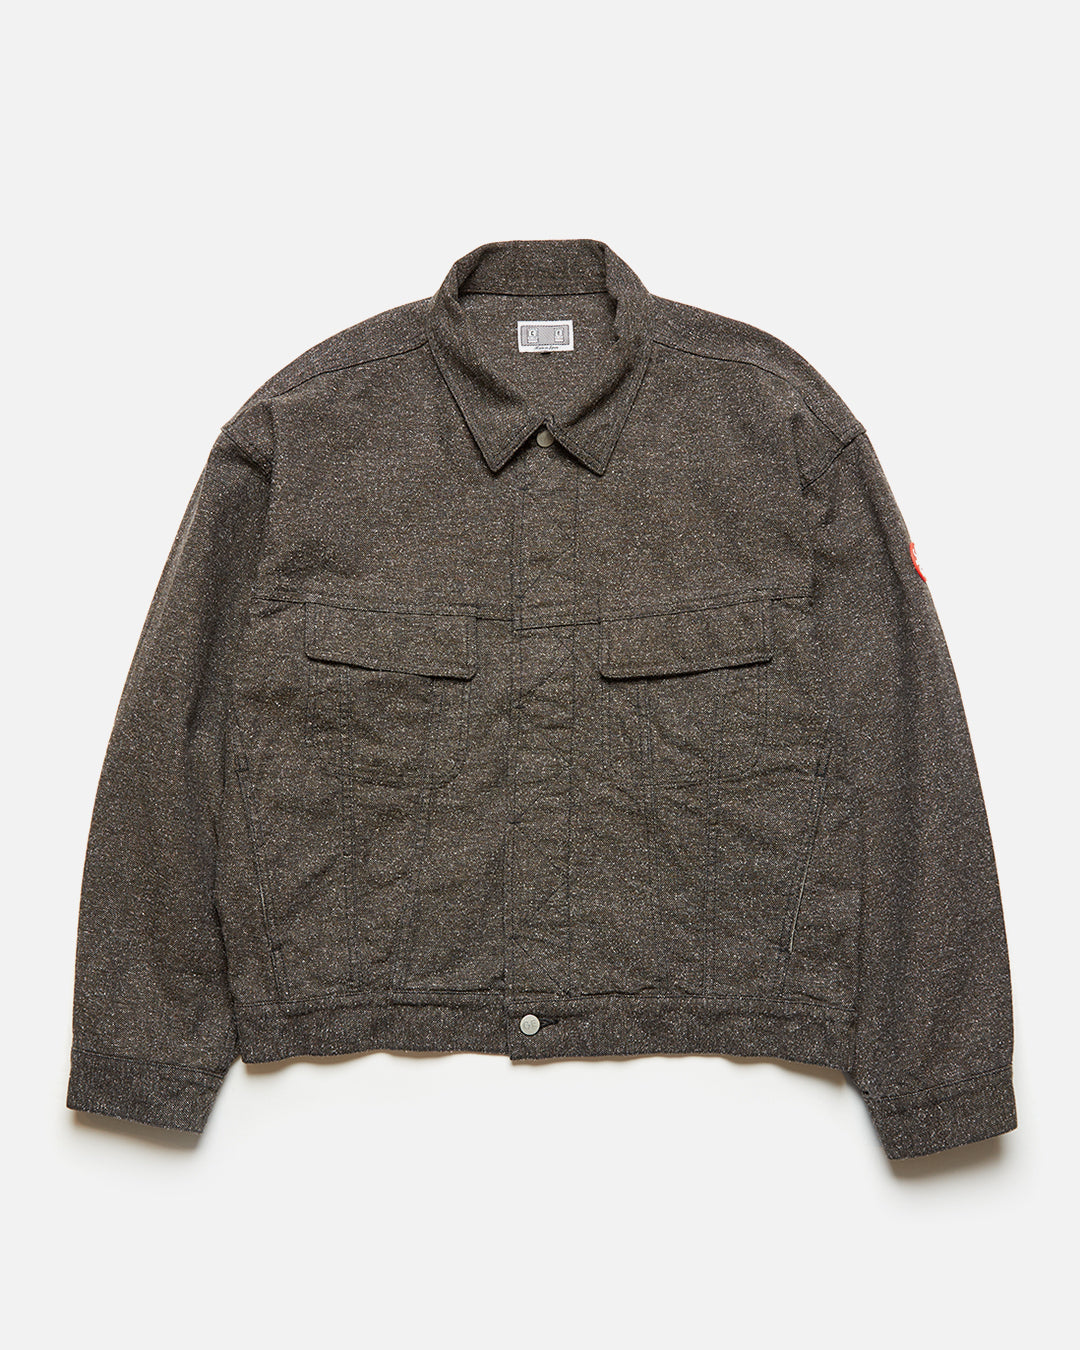 Cav Empt Casual Nep Twill Trucker Jacket in Brown | Blues Store